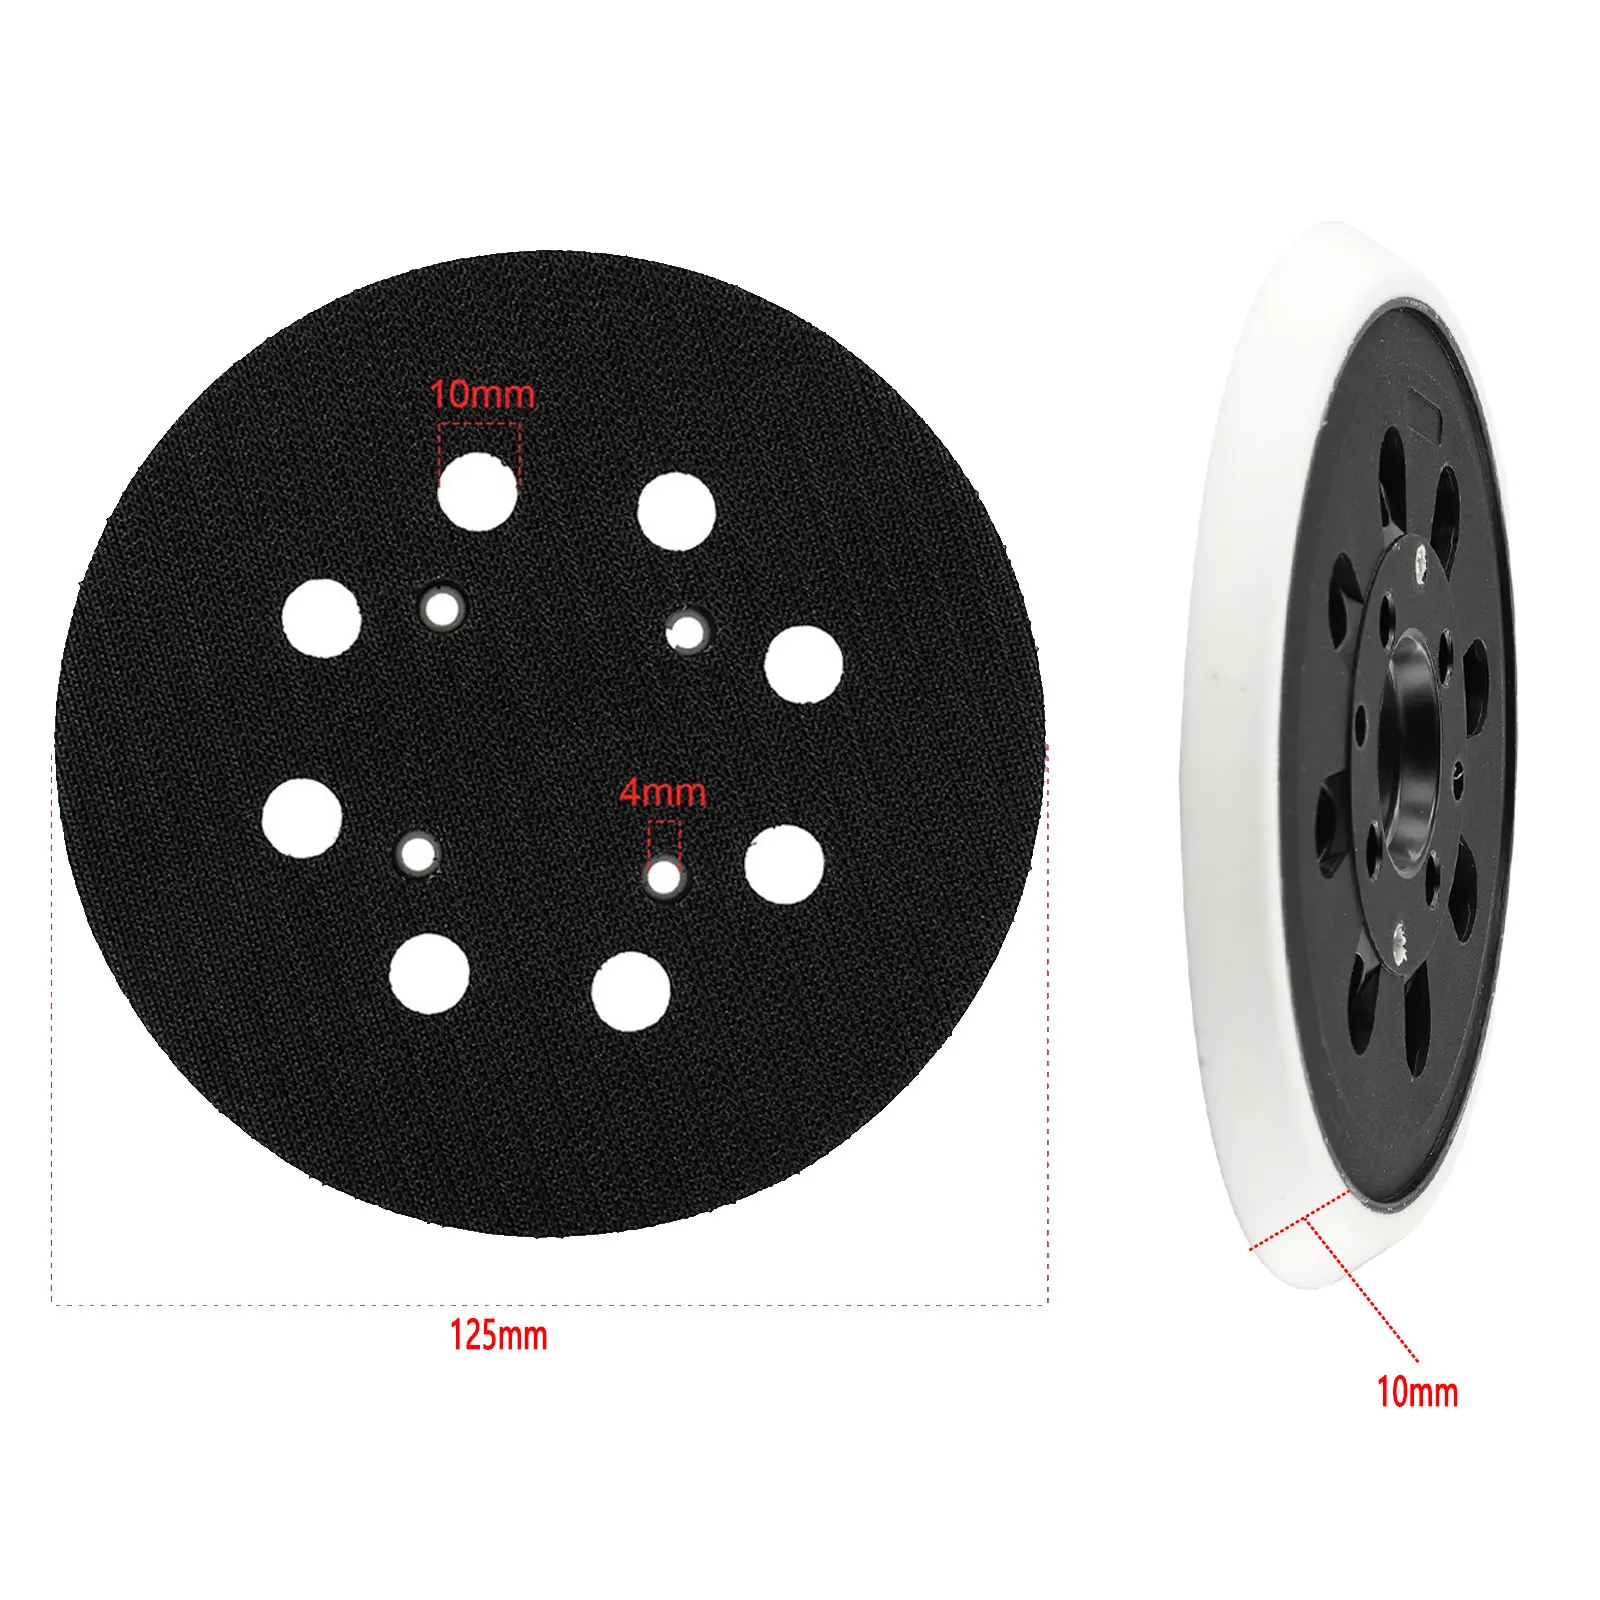 5 Inch 125mm Backing Pad Sanding Pad Hook&loop Connection For Bosch PEX 300 AE 400 AE 4000 AE Power Tools Accessories насос daewoo power products das 4000 50